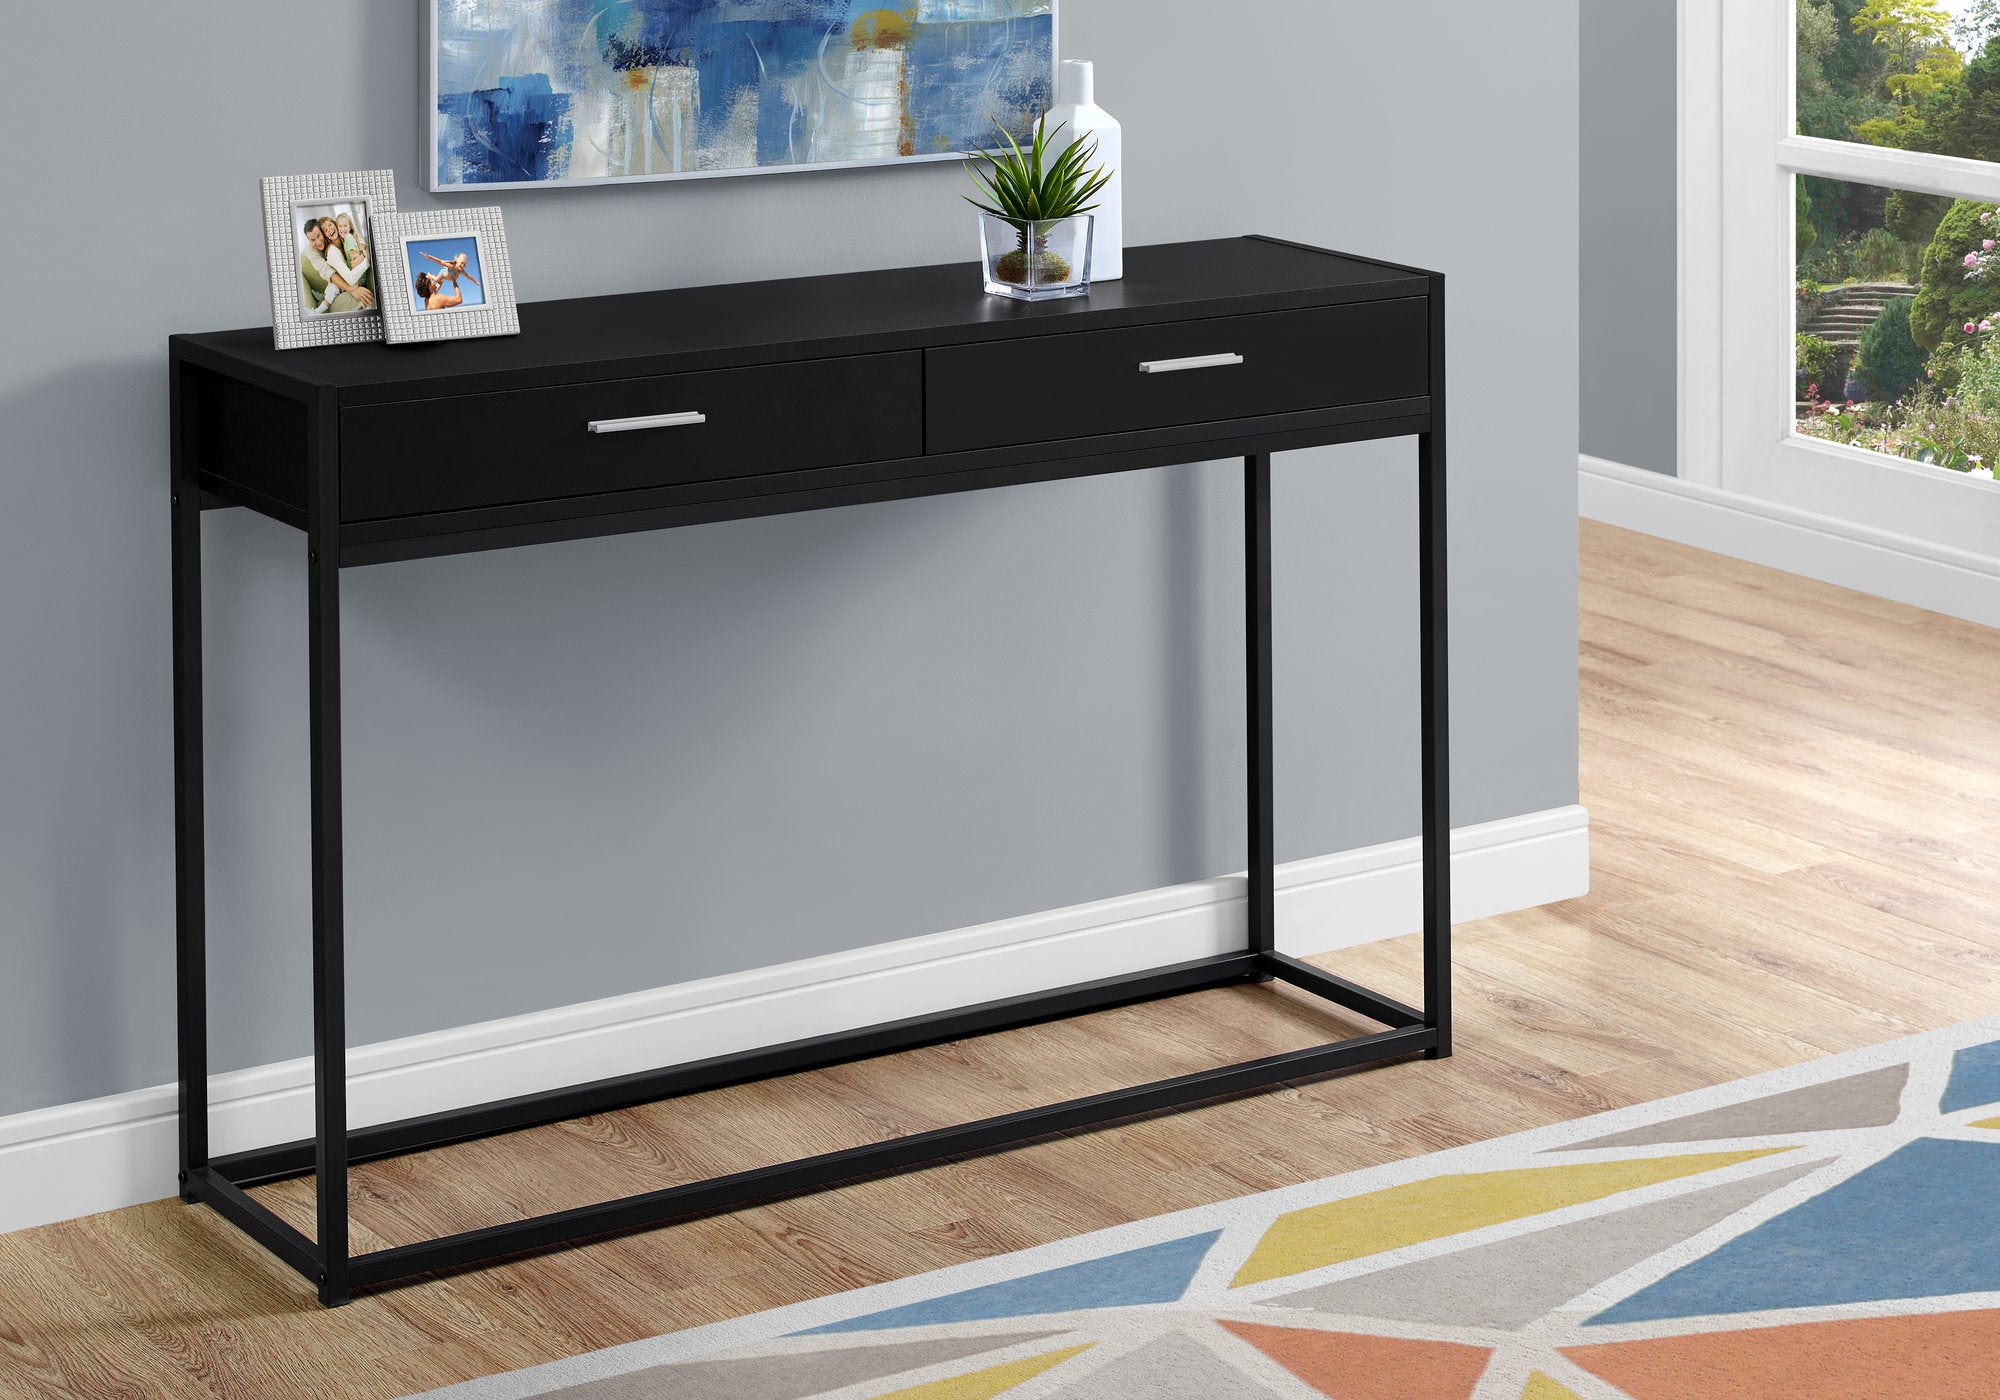 MN-163512    Accent Table, Console, Entryway, Narrow, Sofa, Living Room, Bedroom, Metal Frame, Laminate, Black, Contemporary, Modern